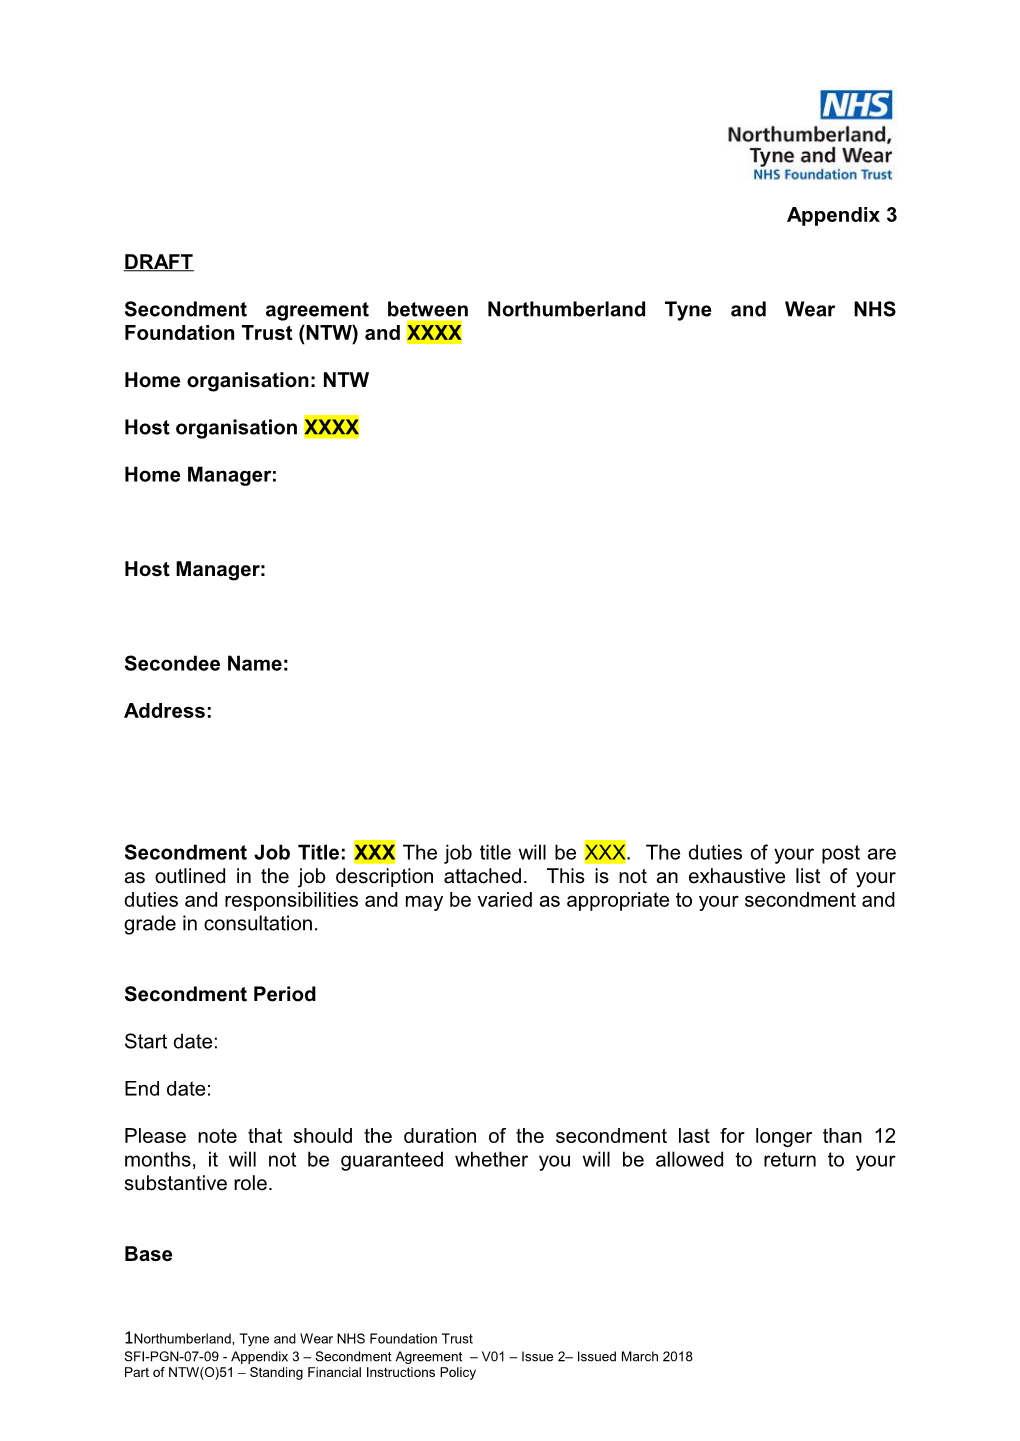 Secondment Agreement Between Northumberland Tyne and Wear NHS Foundation Trust (NTW) and XXXX